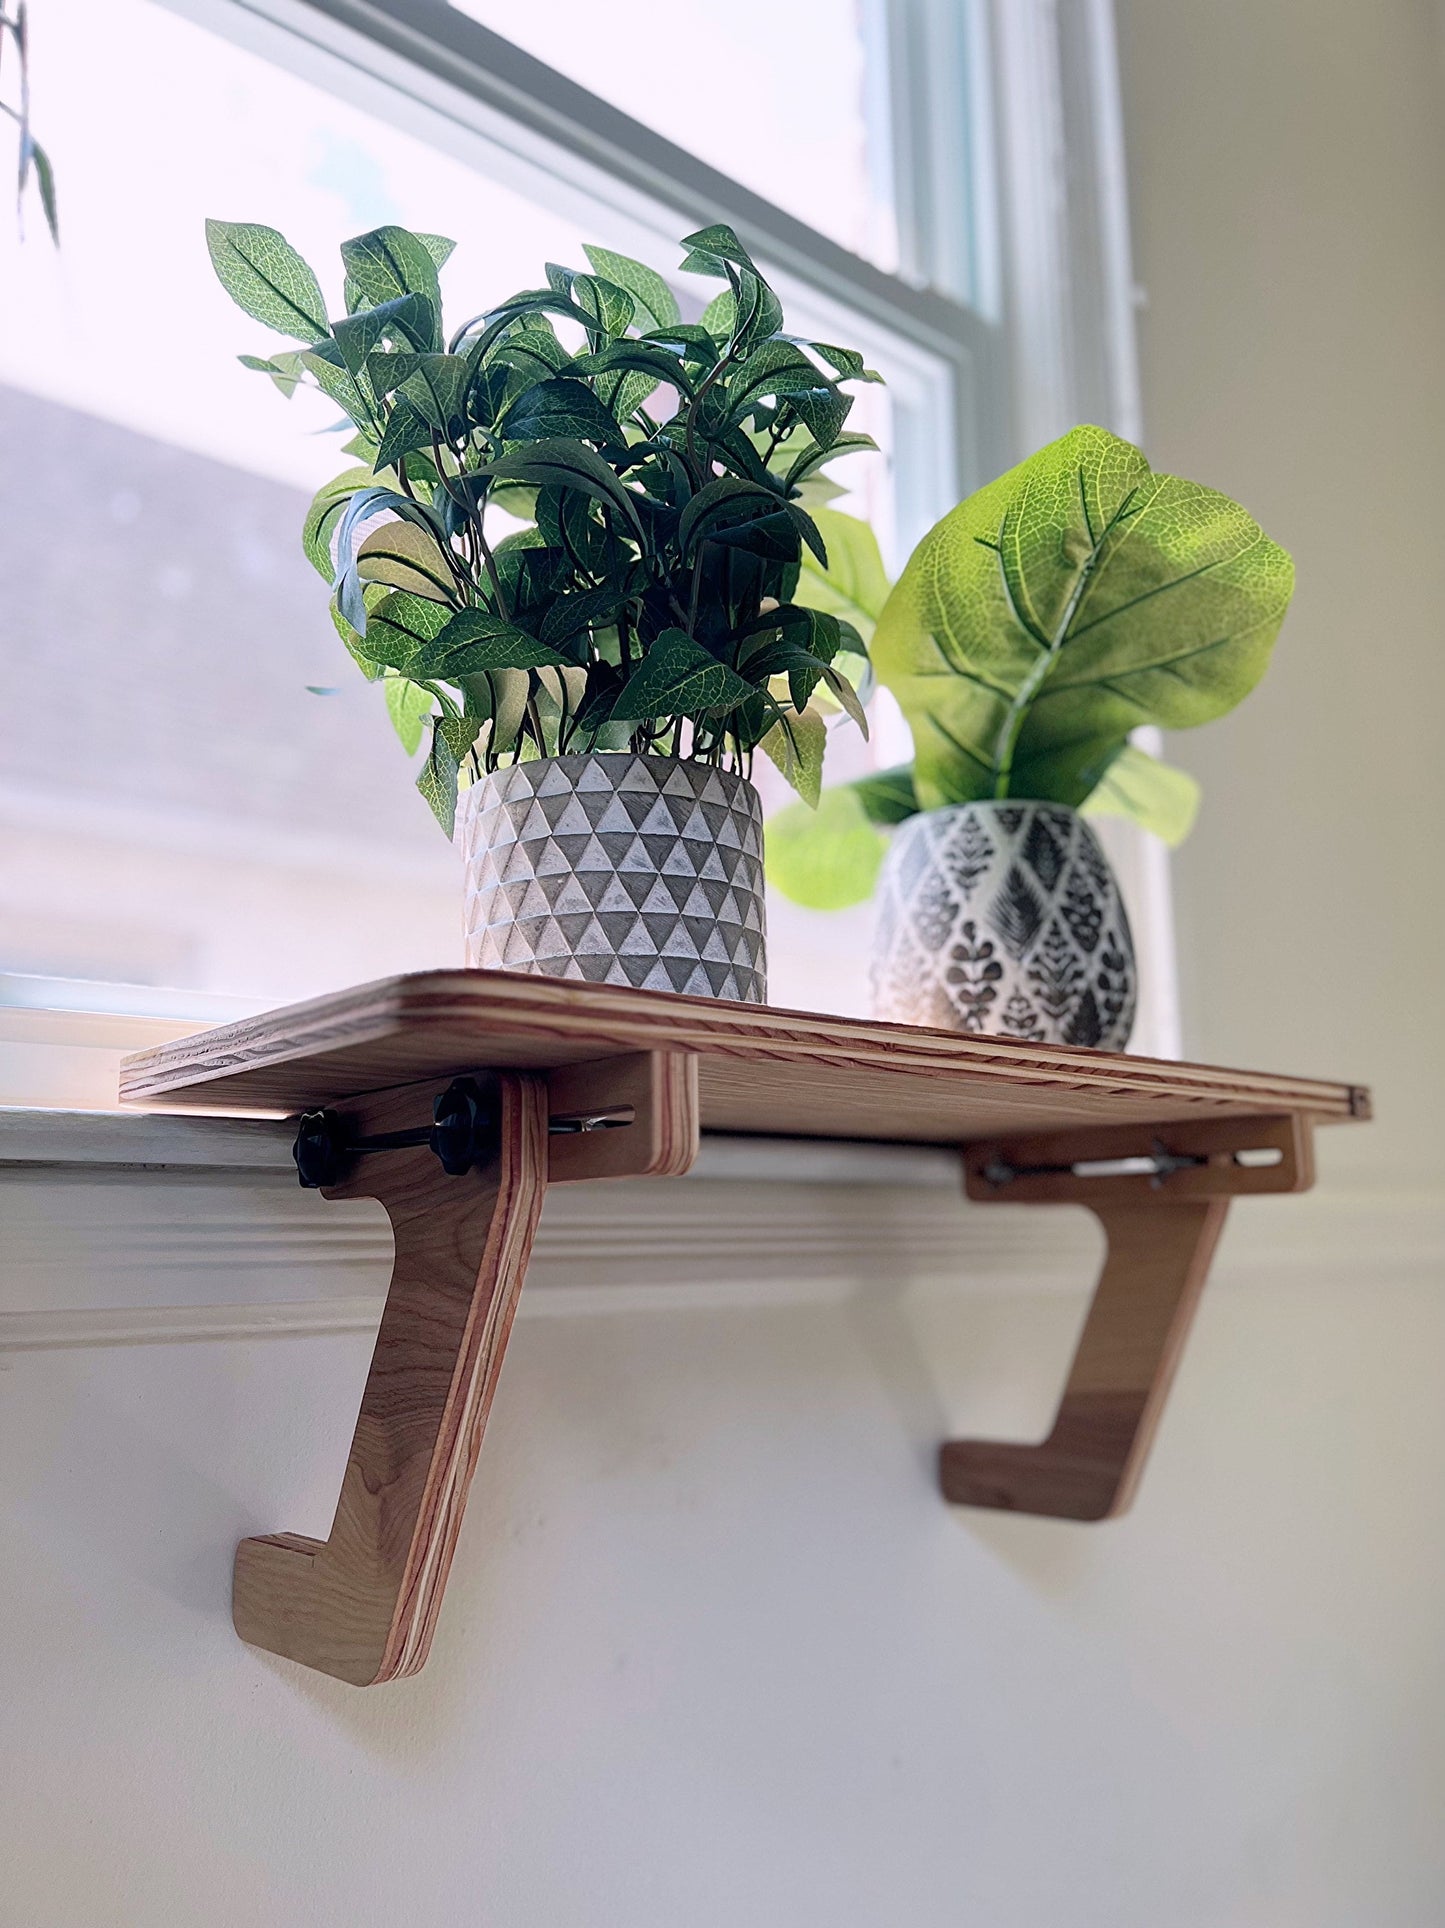 Oak Window Shelf_ Sturdy-Safe support legs _ Installed-removed 1 minute _ No tools No nails _ Plant - Flower Hanging Shelf_22"x10"_21"x15"